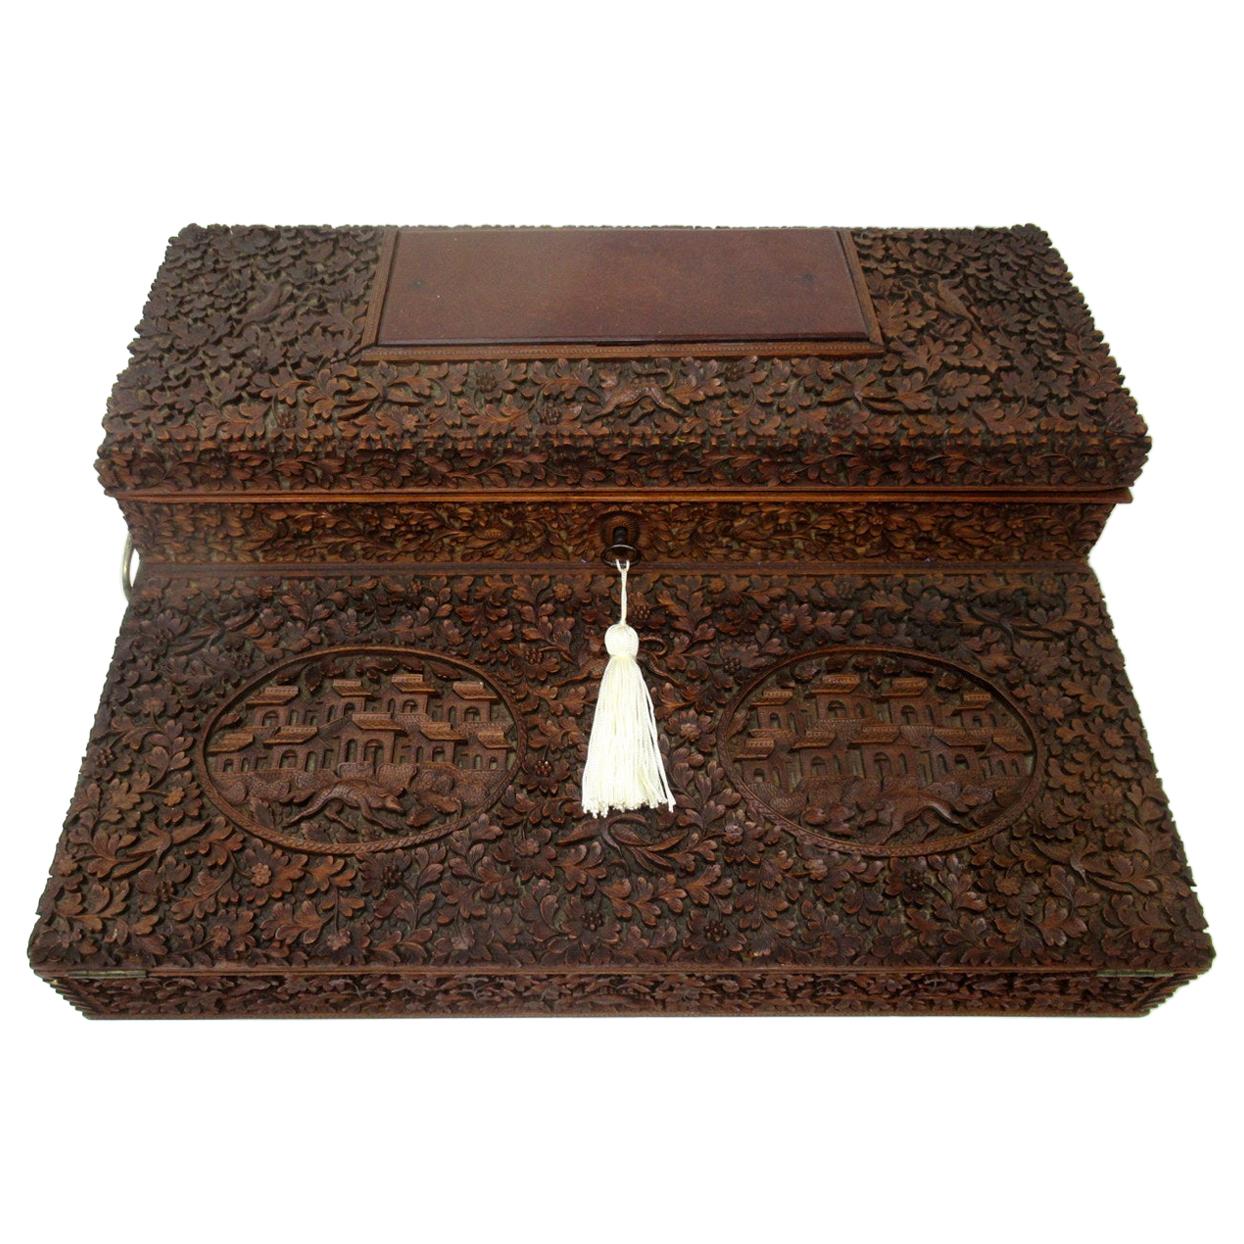 Antique Anglo-Indian Bombay Carved Sandalwood Writing Slope Box Mid-19th Century